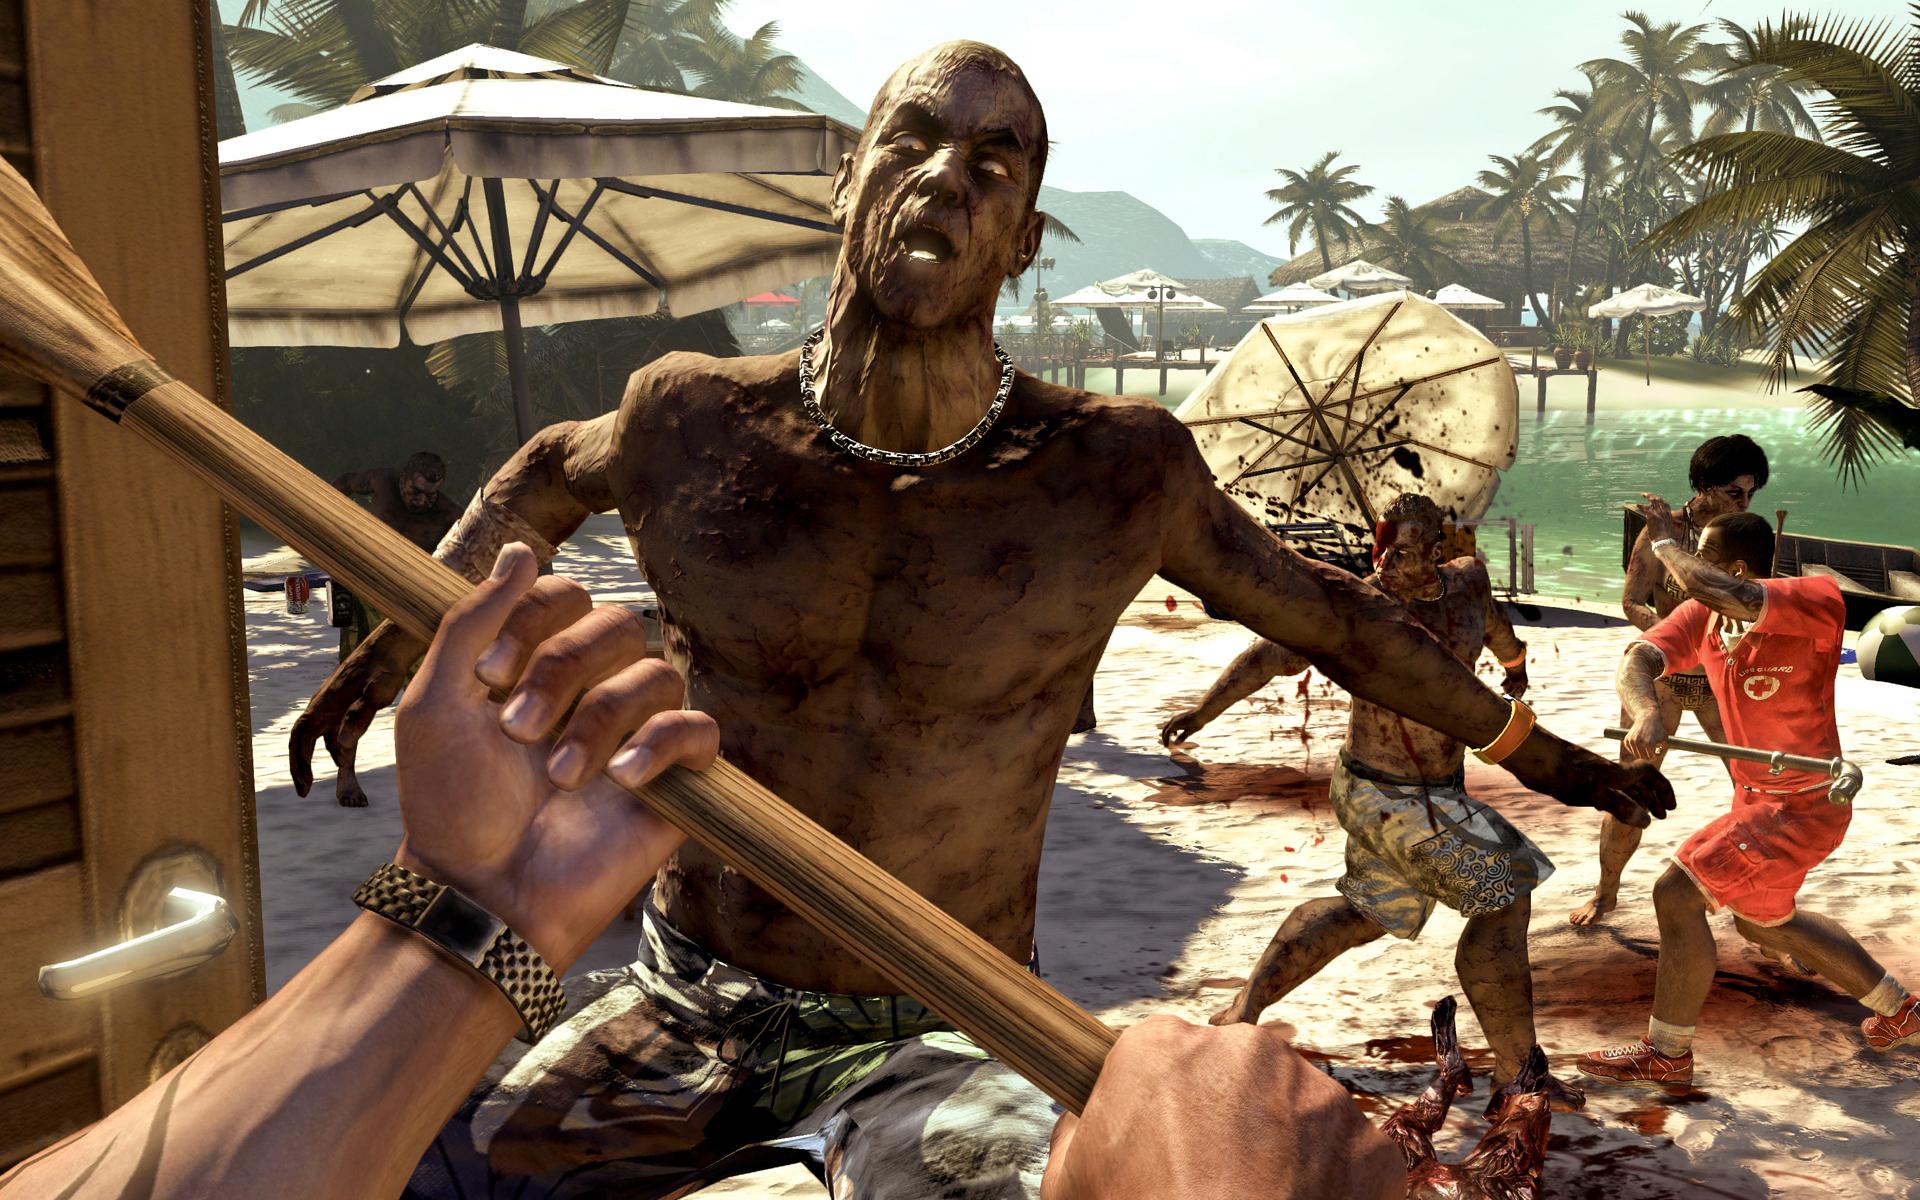 is dead island 2 canceled